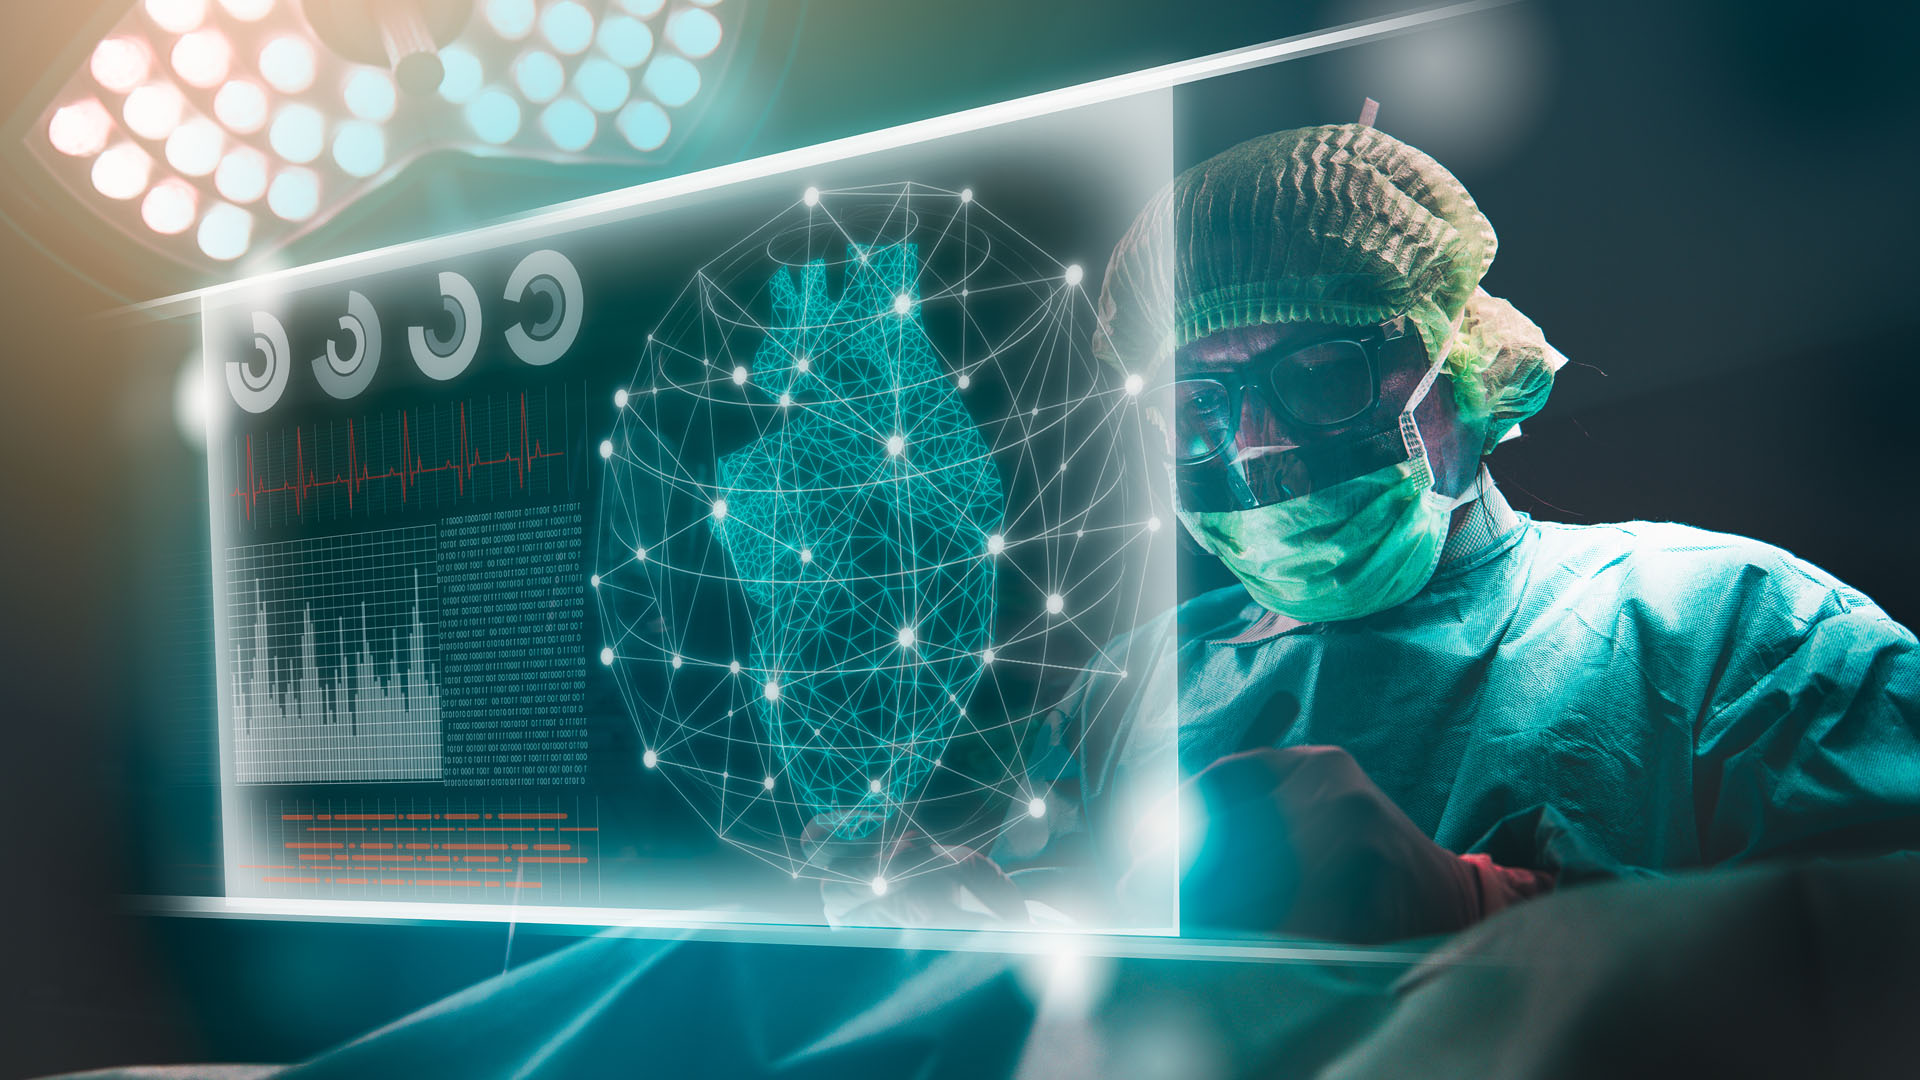 a surgeon in scrubs and a surgical mask, looking at a holographic display of a heart, suggesting the use of AI in surgical procedures.